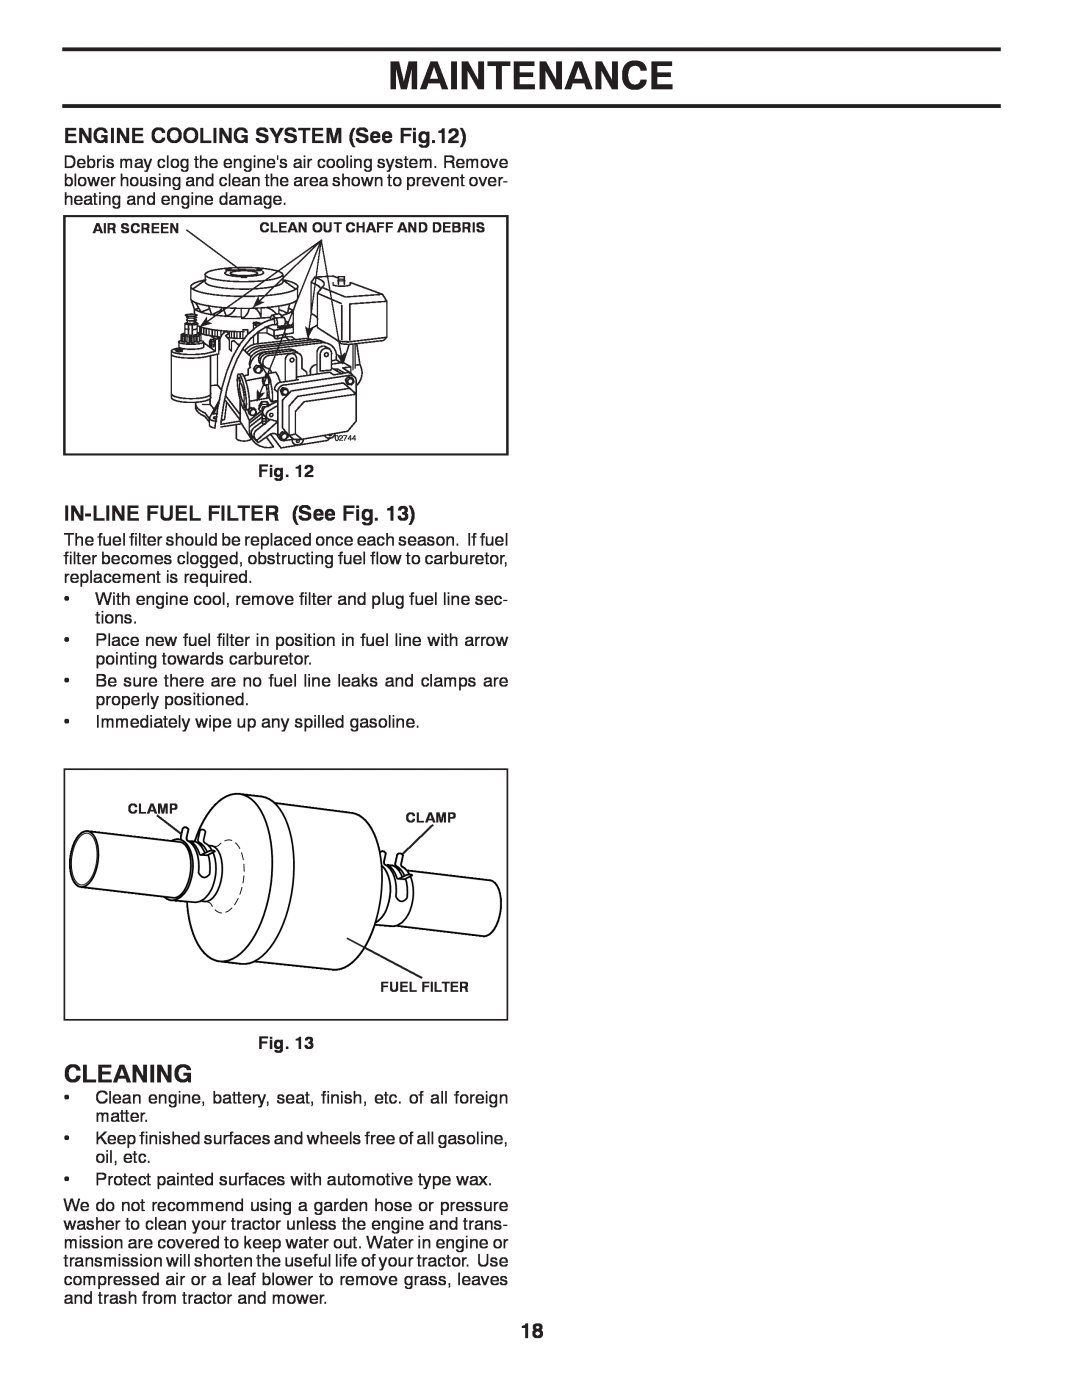 Weed Eater 96018000100, 435073 manual Cleaning, ENGINE COOLING SYSTEM See, IN-LINE FUEL FILTER See Fig, Maintenance 